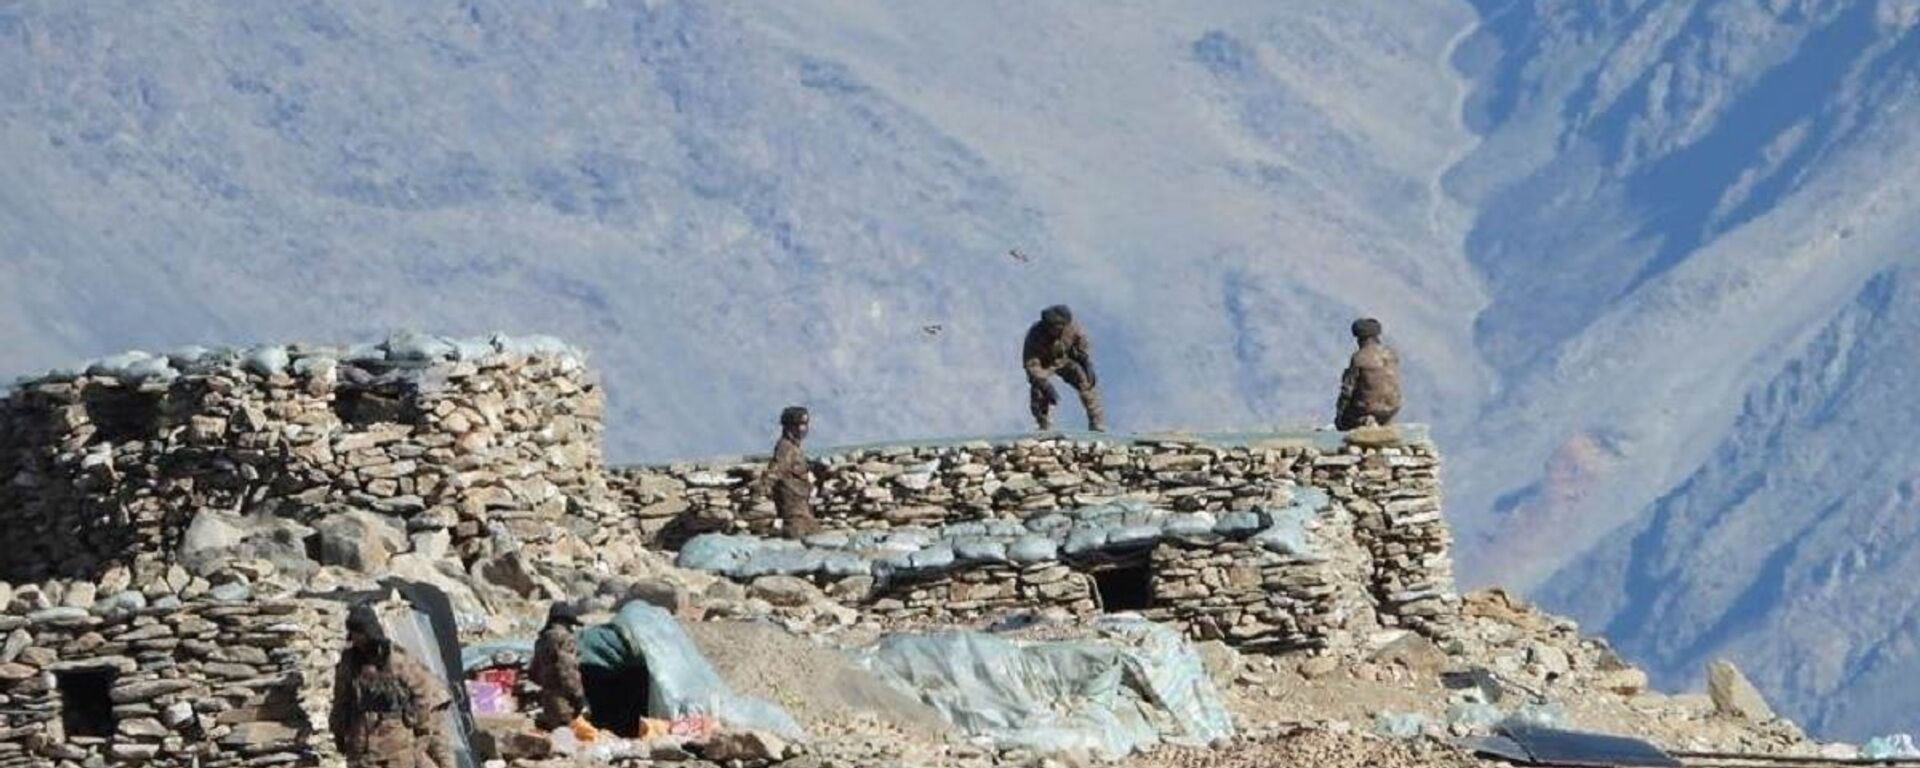 This photograph provided by the Indian Army, according to them shows Chinese troops dismantling their bunkers at Pangong Tso region, in Ladakh along the India-China border on Monday, Feb.15, 2021 - Sputnik International, 1920, 27.10.2021